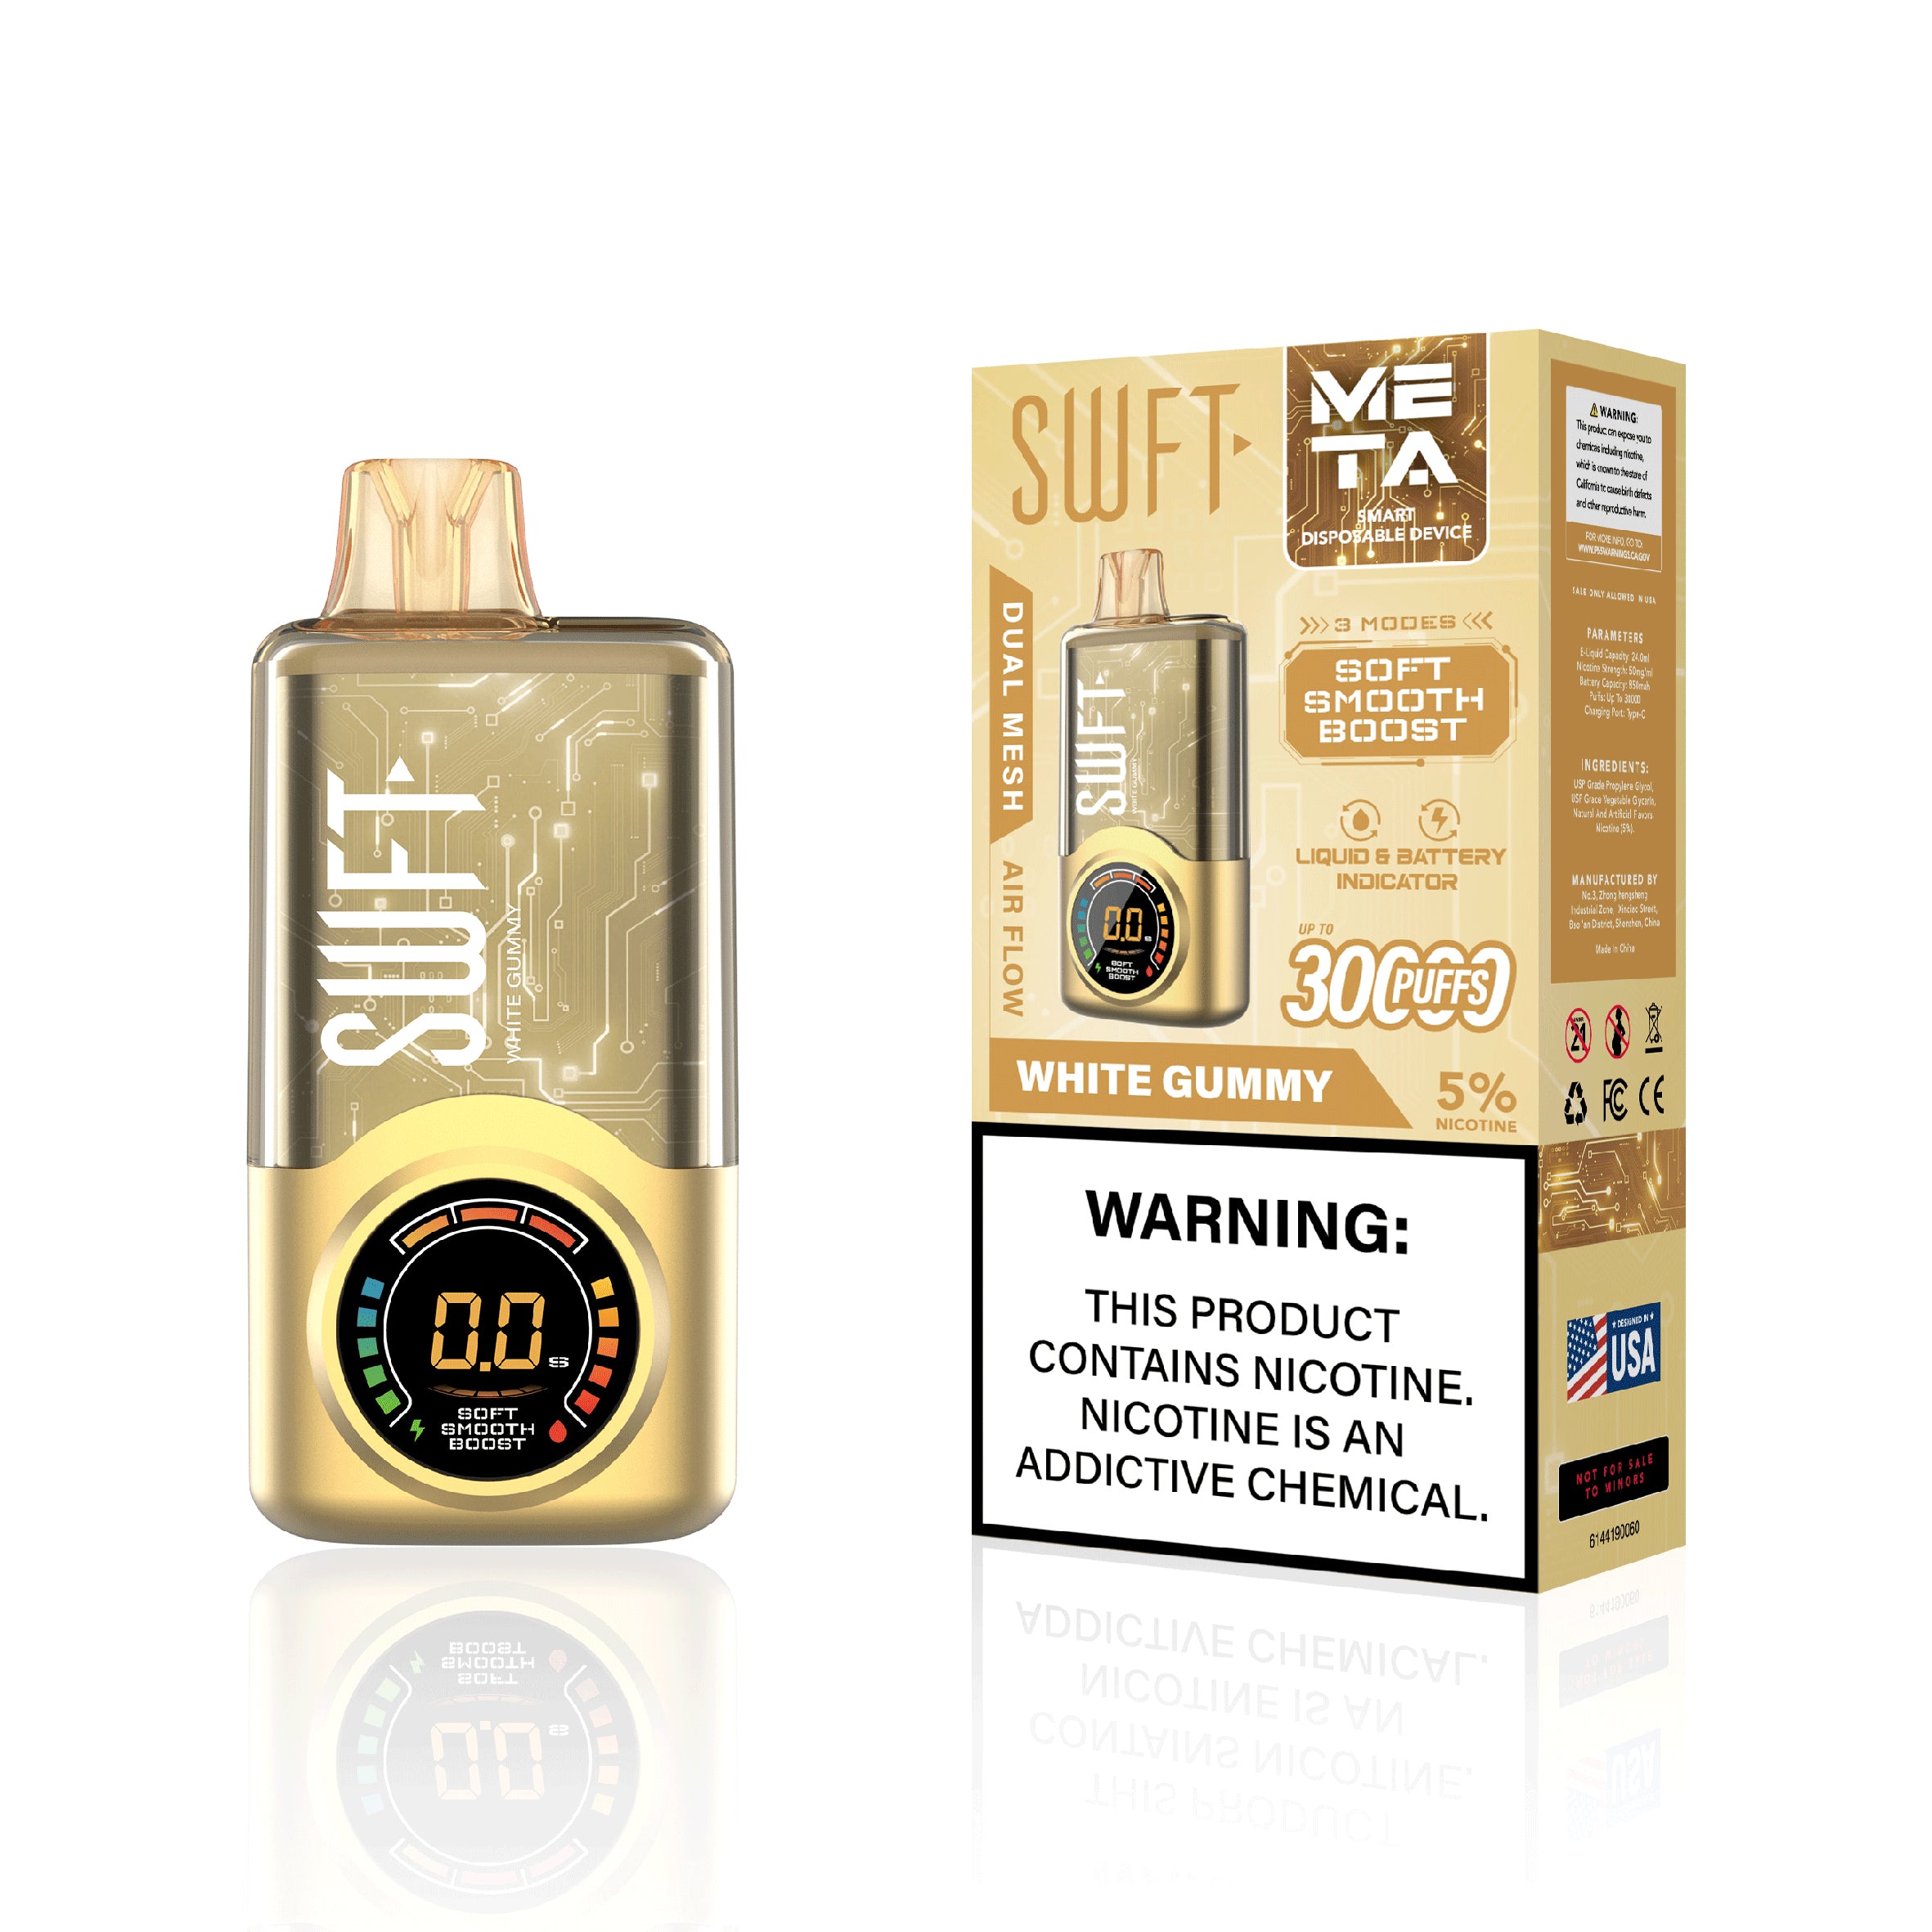 SWFT META 30000 PUFFS ADJUSTABLE WATTAGE DISPOSABLE VAPE DEVICE DUAL MESH COIL LIQUID AND BATTERY INDICATOR WHITE GUMMY